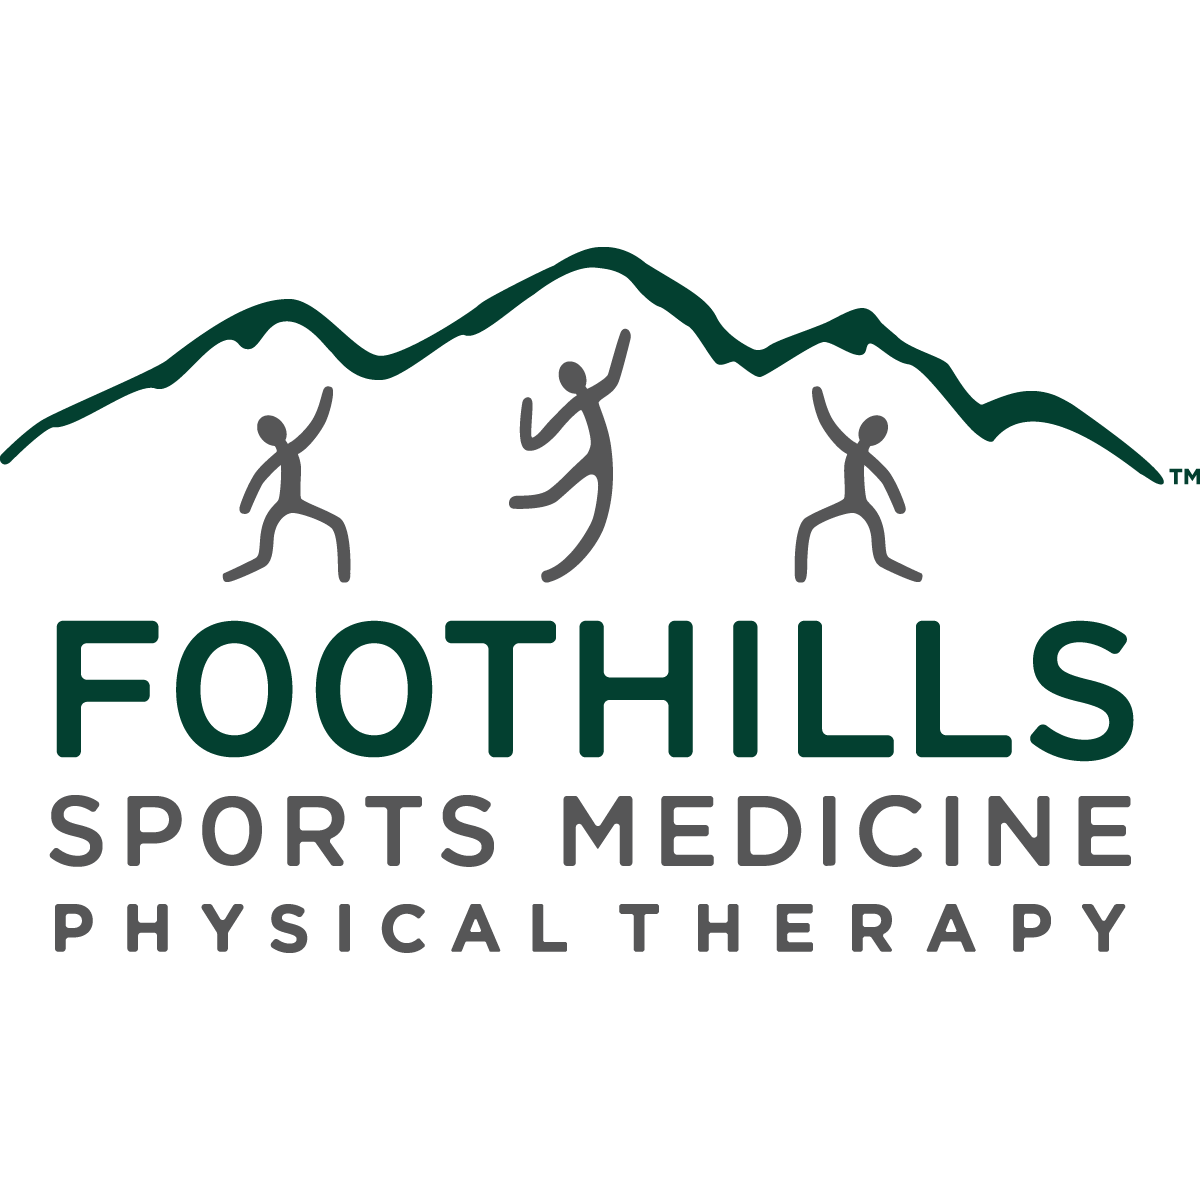 Foothills Physical Therapy & Sports Medicine - Surprise, AZ 85374 - (623)975-5374 | ShowMeLocal.com